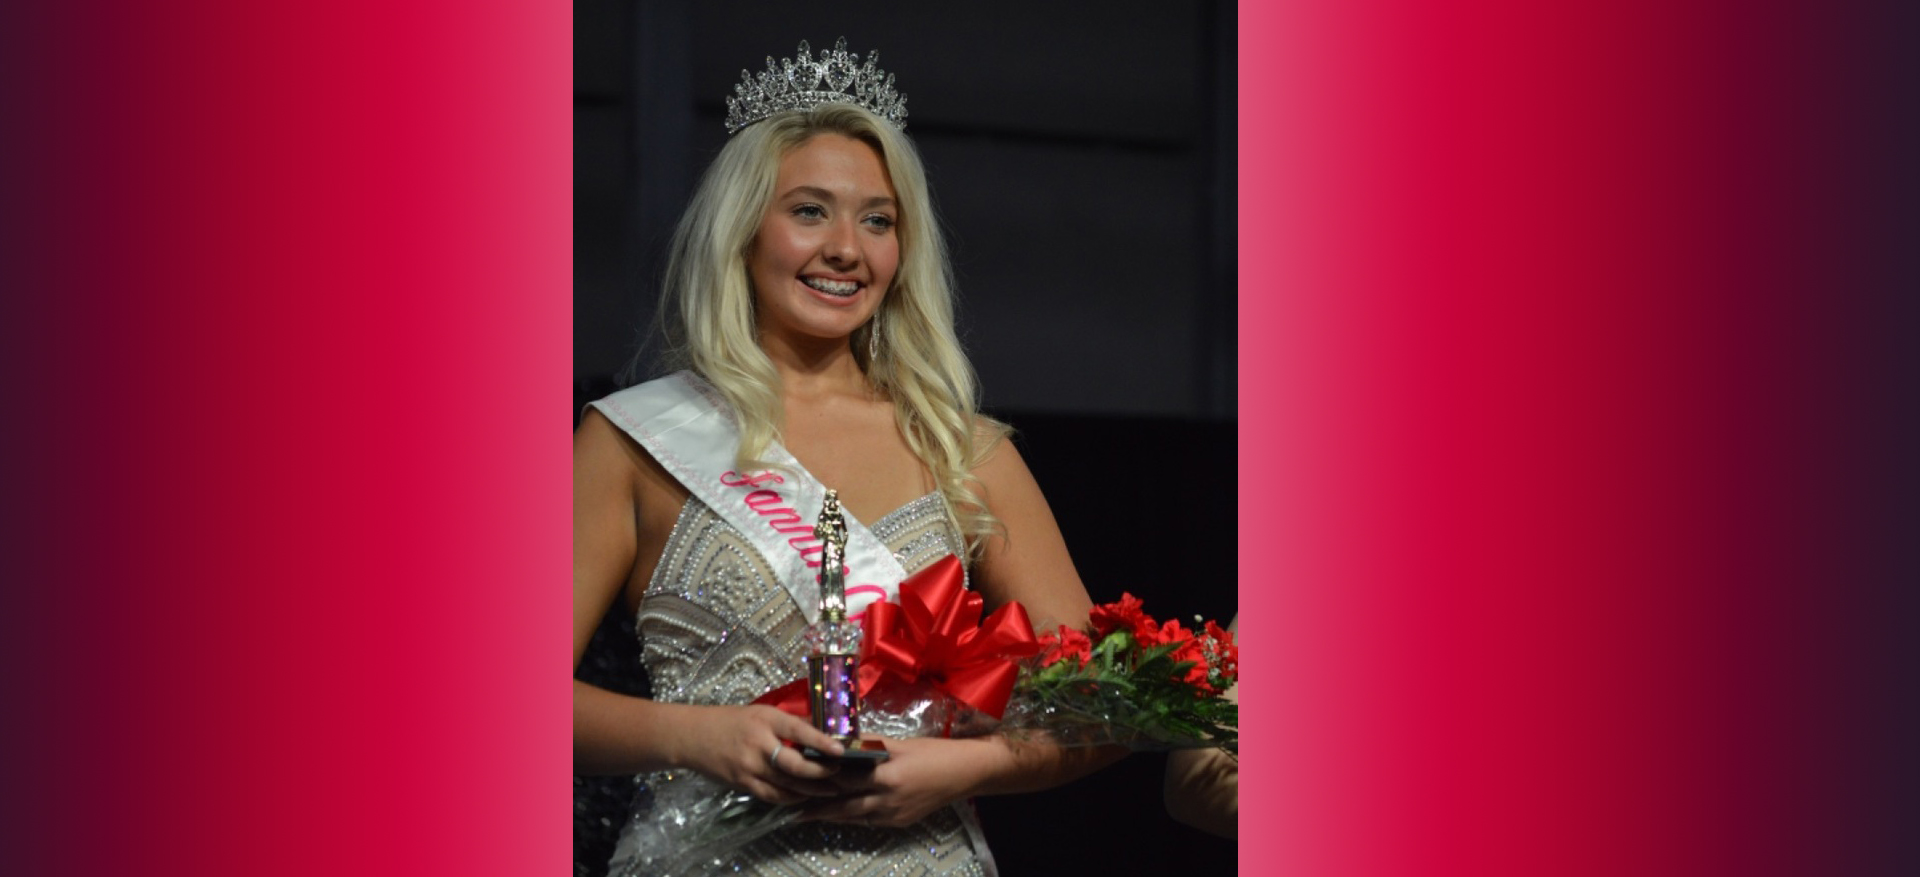 Congratulations to Trenton High Schools Ashley Vasquez on being crowned the 2022 Fannin County Fair Queen! 